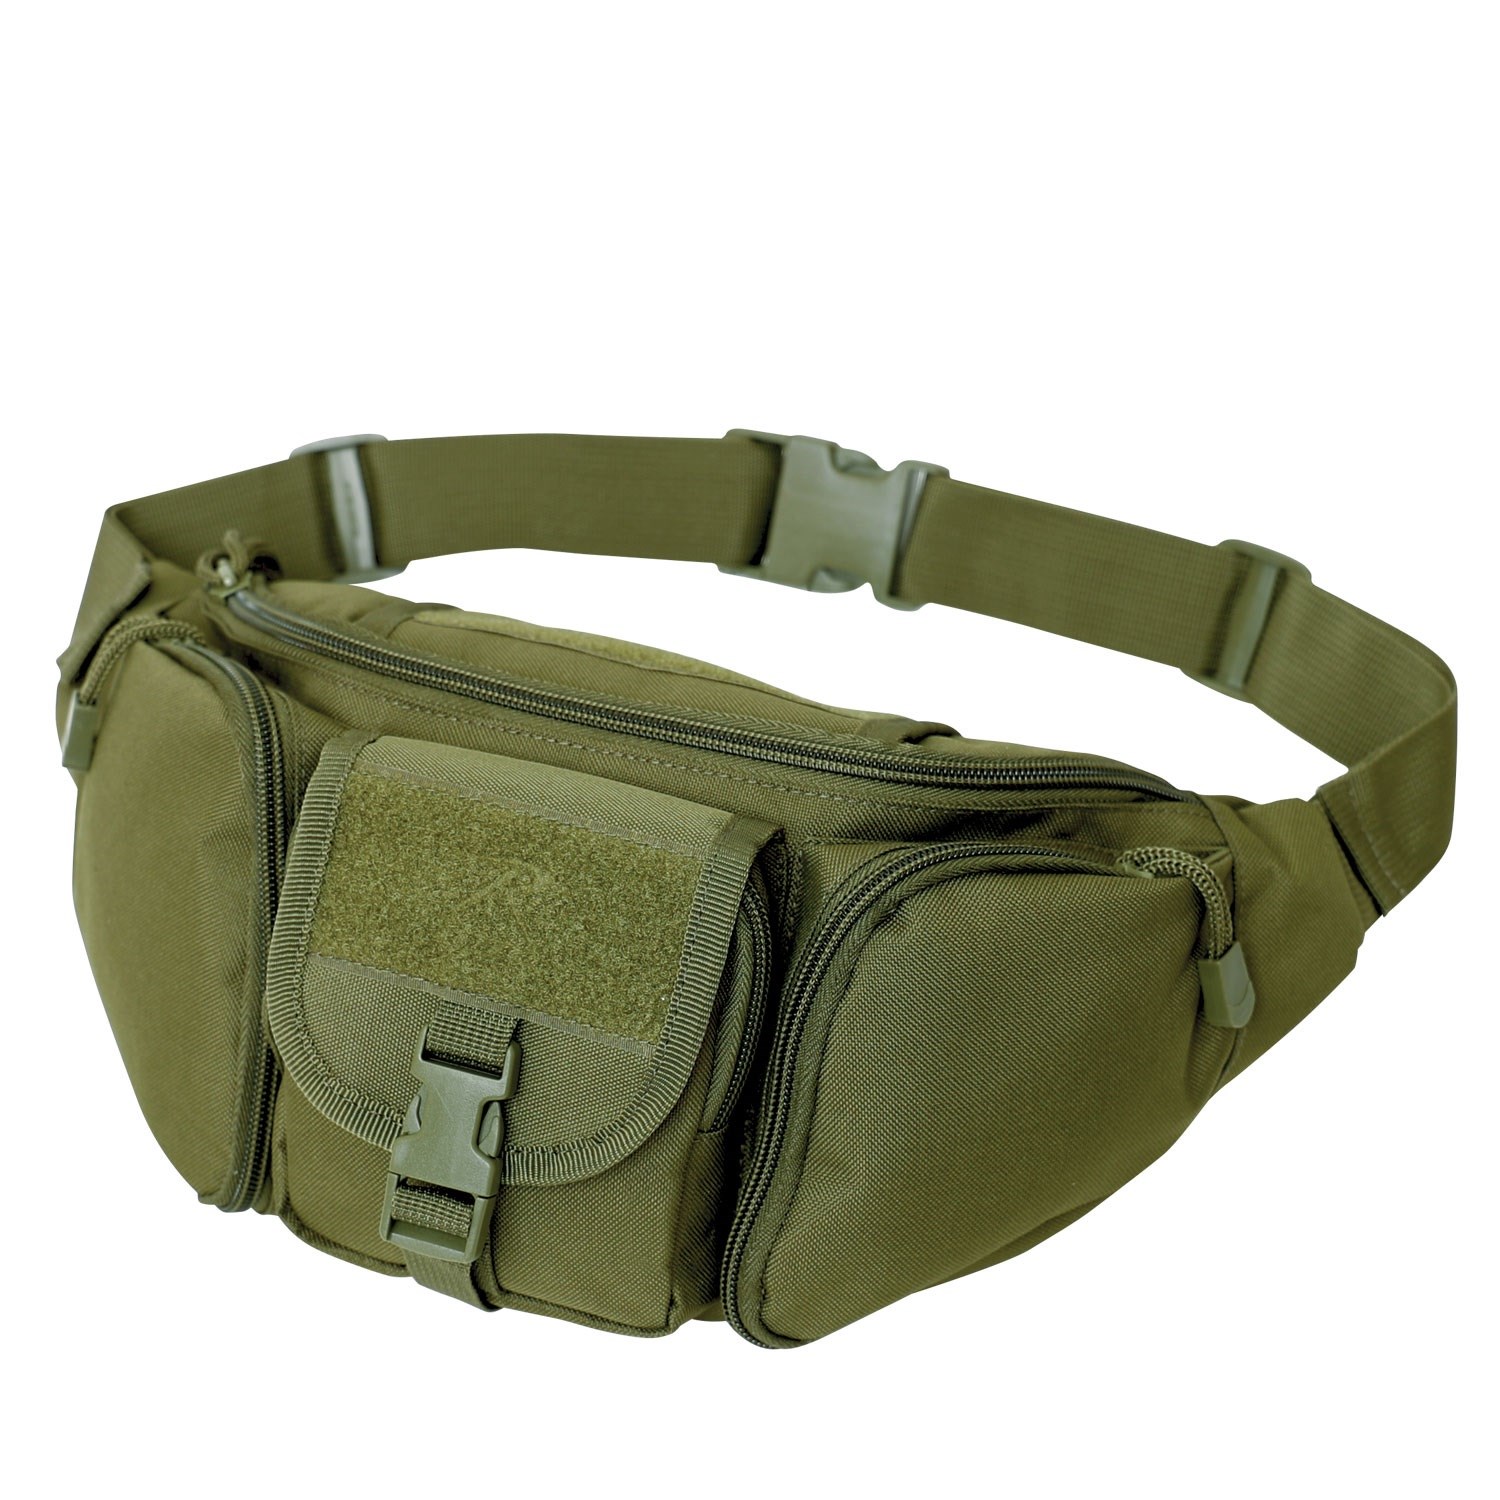 ROTHCO Tactical Concealed Carry Waist Pack OLIVE DRAB | Army surplus ...